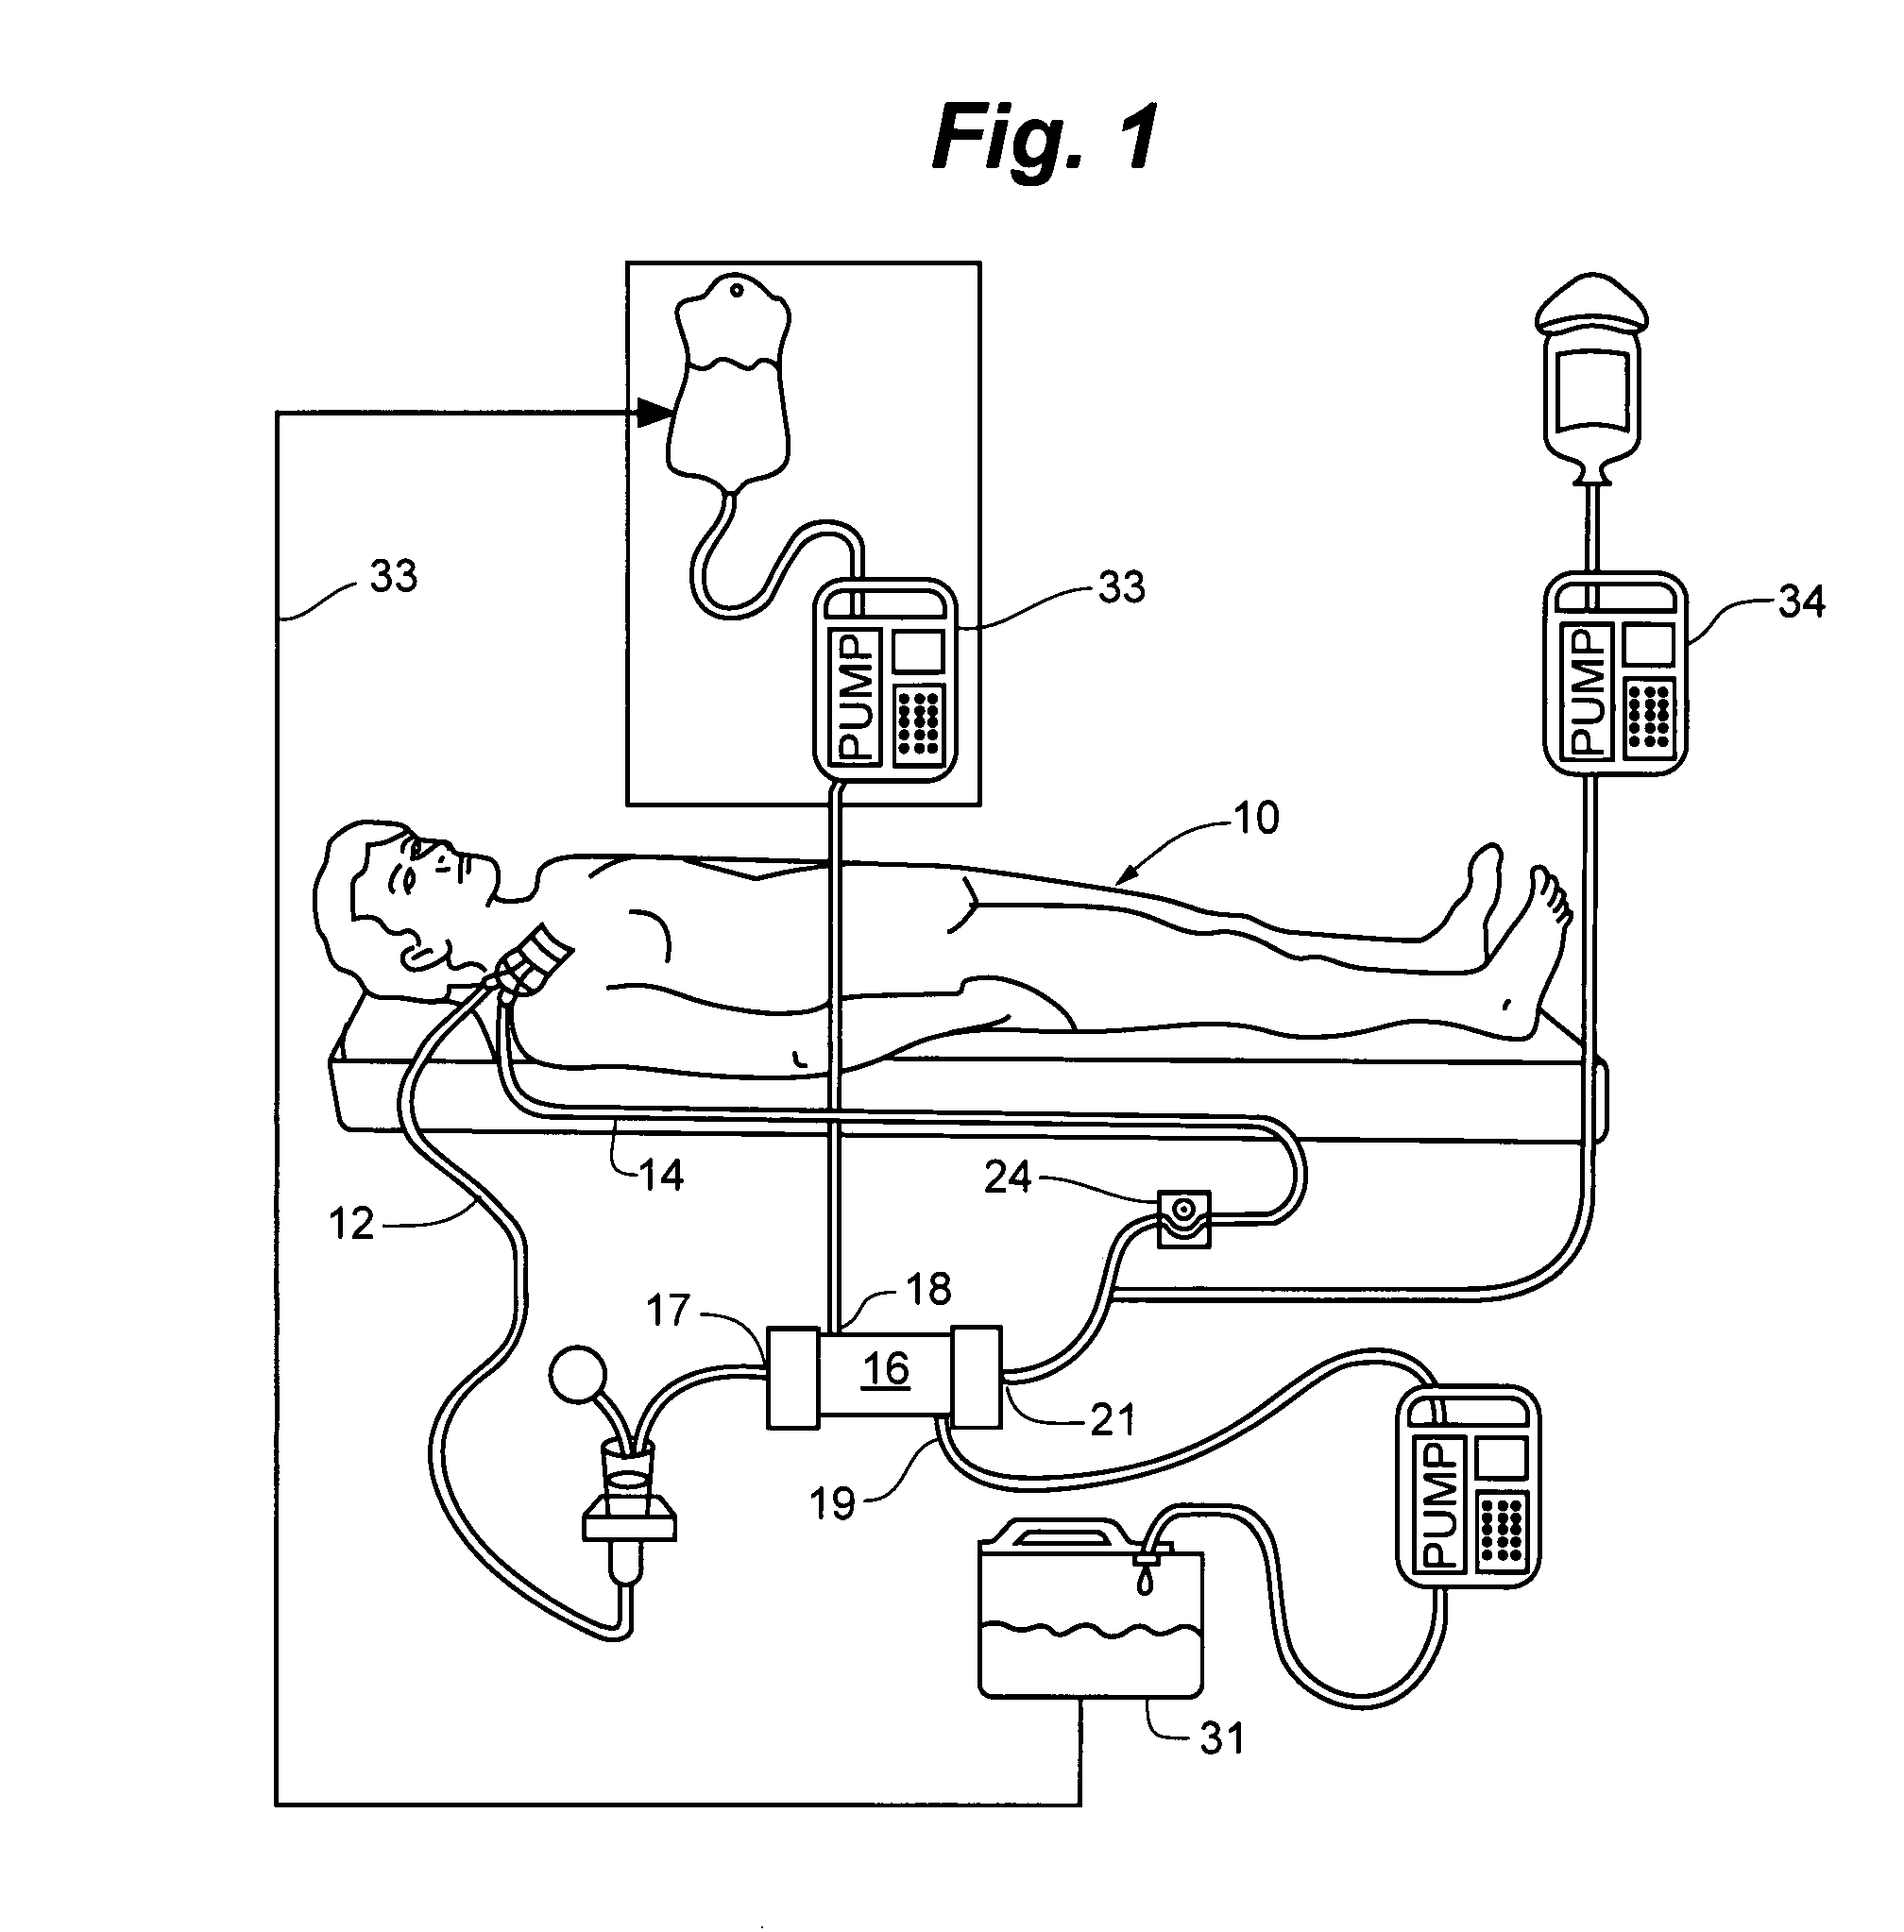 System device and method for oxygenation